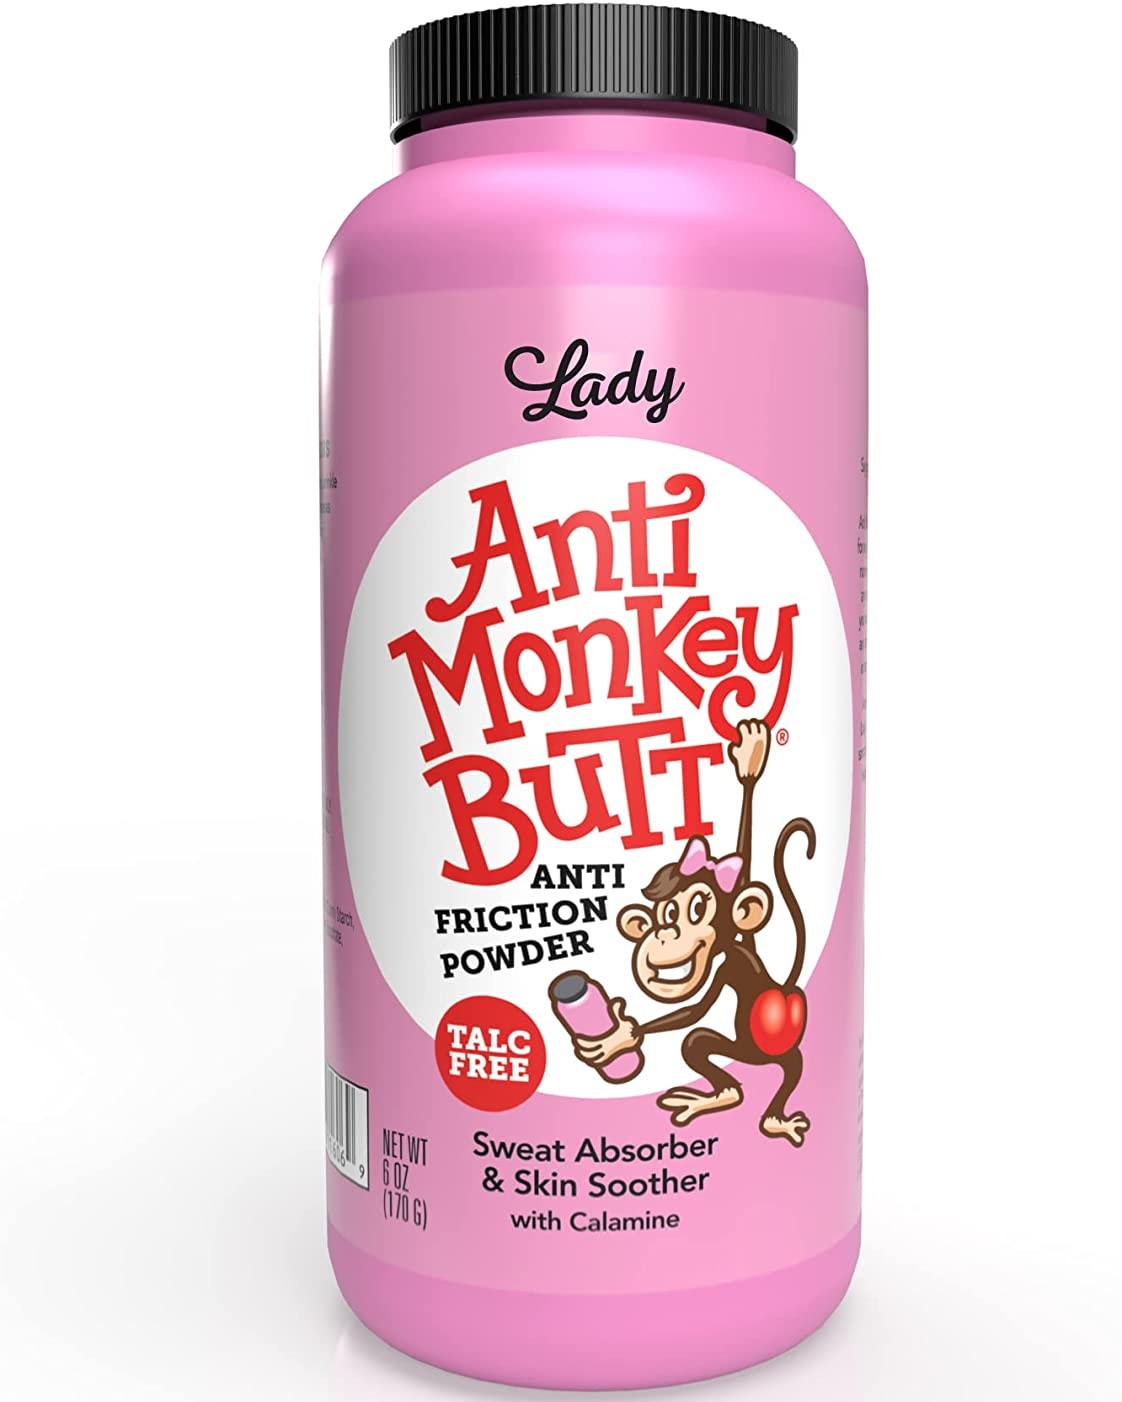 Lady Anti Monkey Butt, Women's Body Powder with Calamine, Prevents  Chafing and Absorbs Sweat, Talc Free, 6 Ounces